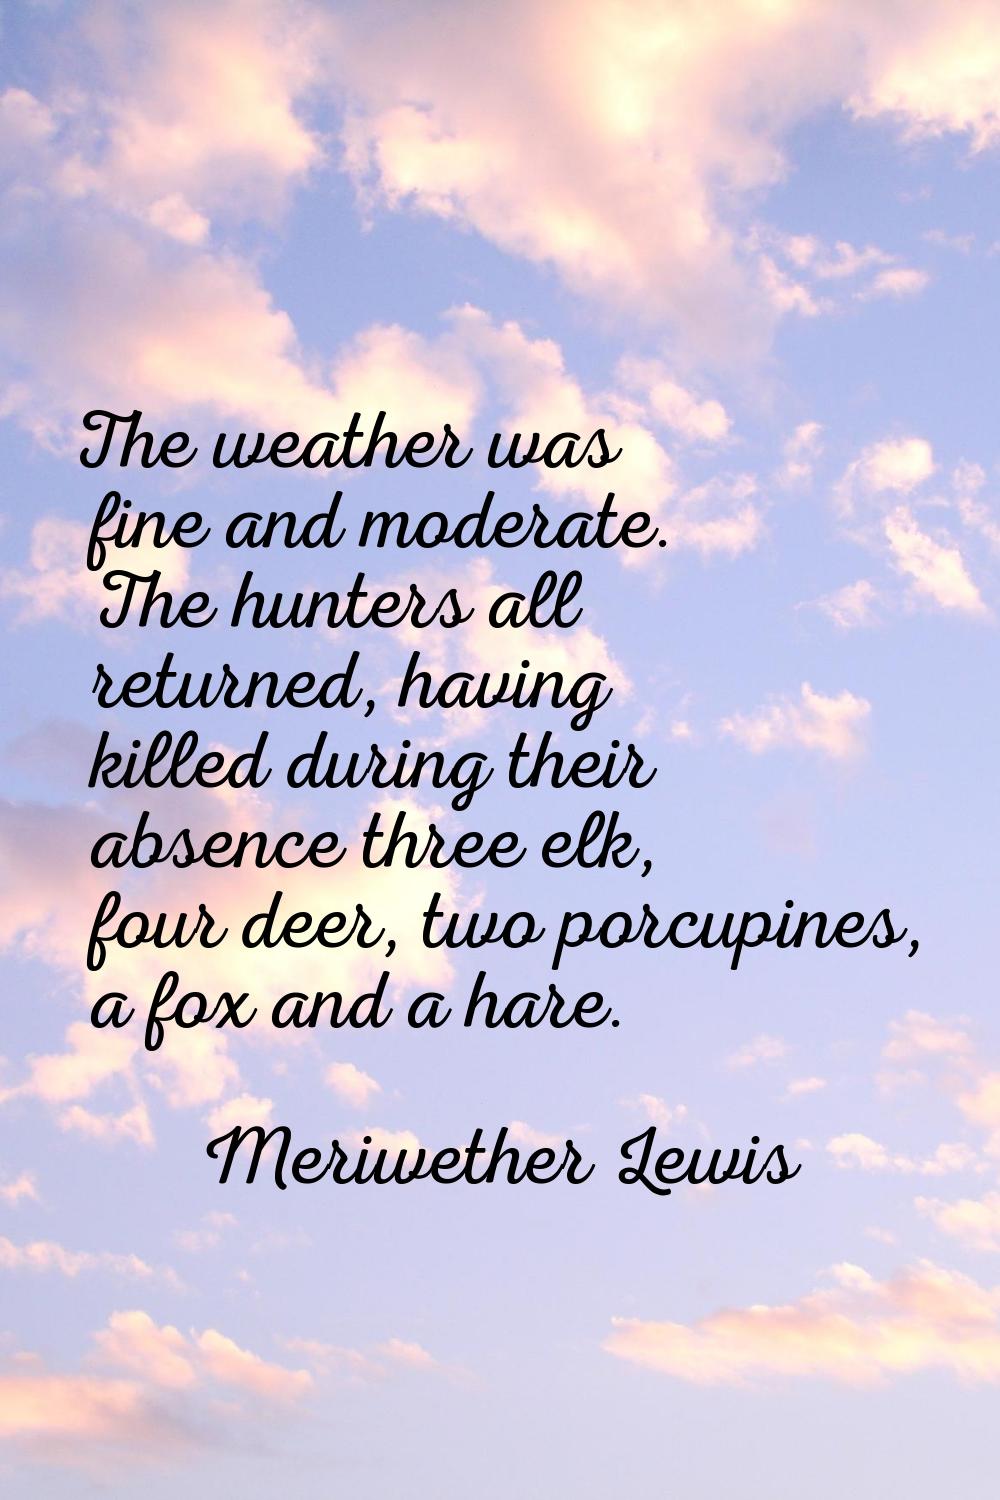 The weather was fine and moderate. The hunters all returned, having killed during their absence thr